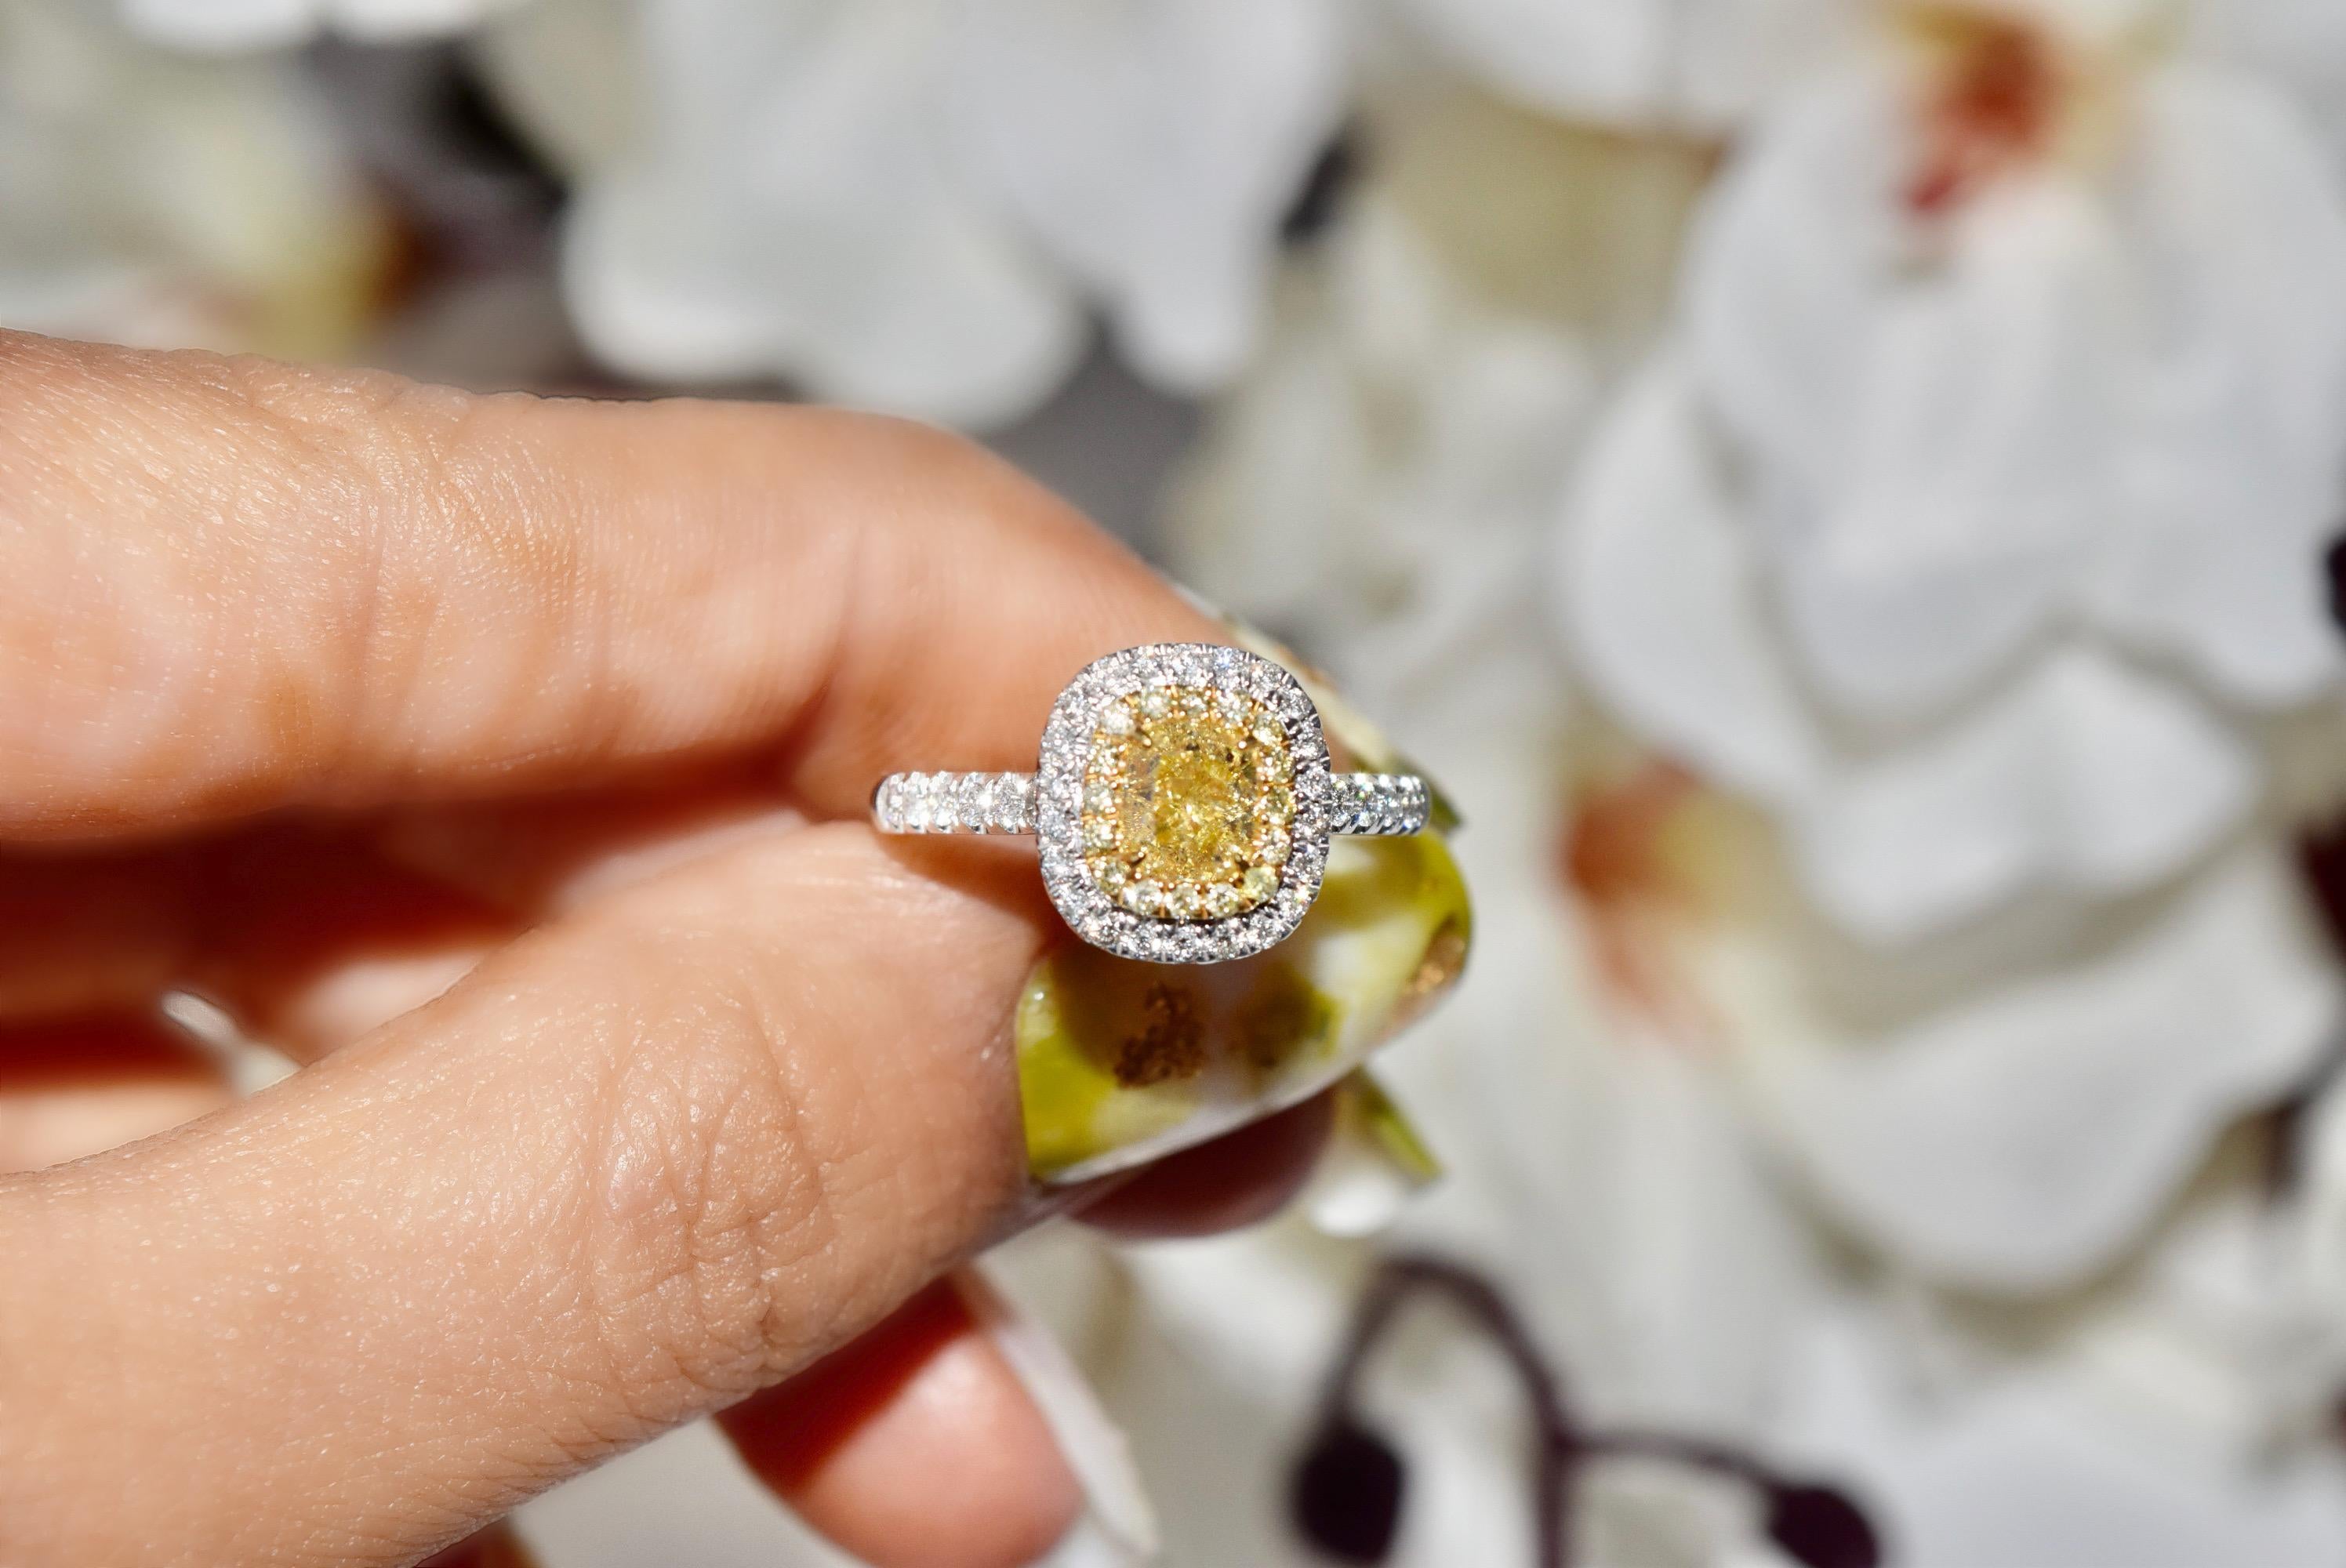 **100% NATURAL FANCY COLOUR DIAMOND JEWELERY**

✪ Jewelry Details ✪

♦ MAIN STONE DETAILS

➛ Stone Shape: Cushion
➛ Stone Color: Fancy Light Yellow
➛ Stone Weight: 0.70 carat
➛ Clarity: VS1
➛ GIA certified

♦ SIDE STONE DETAILS

➛ Side White